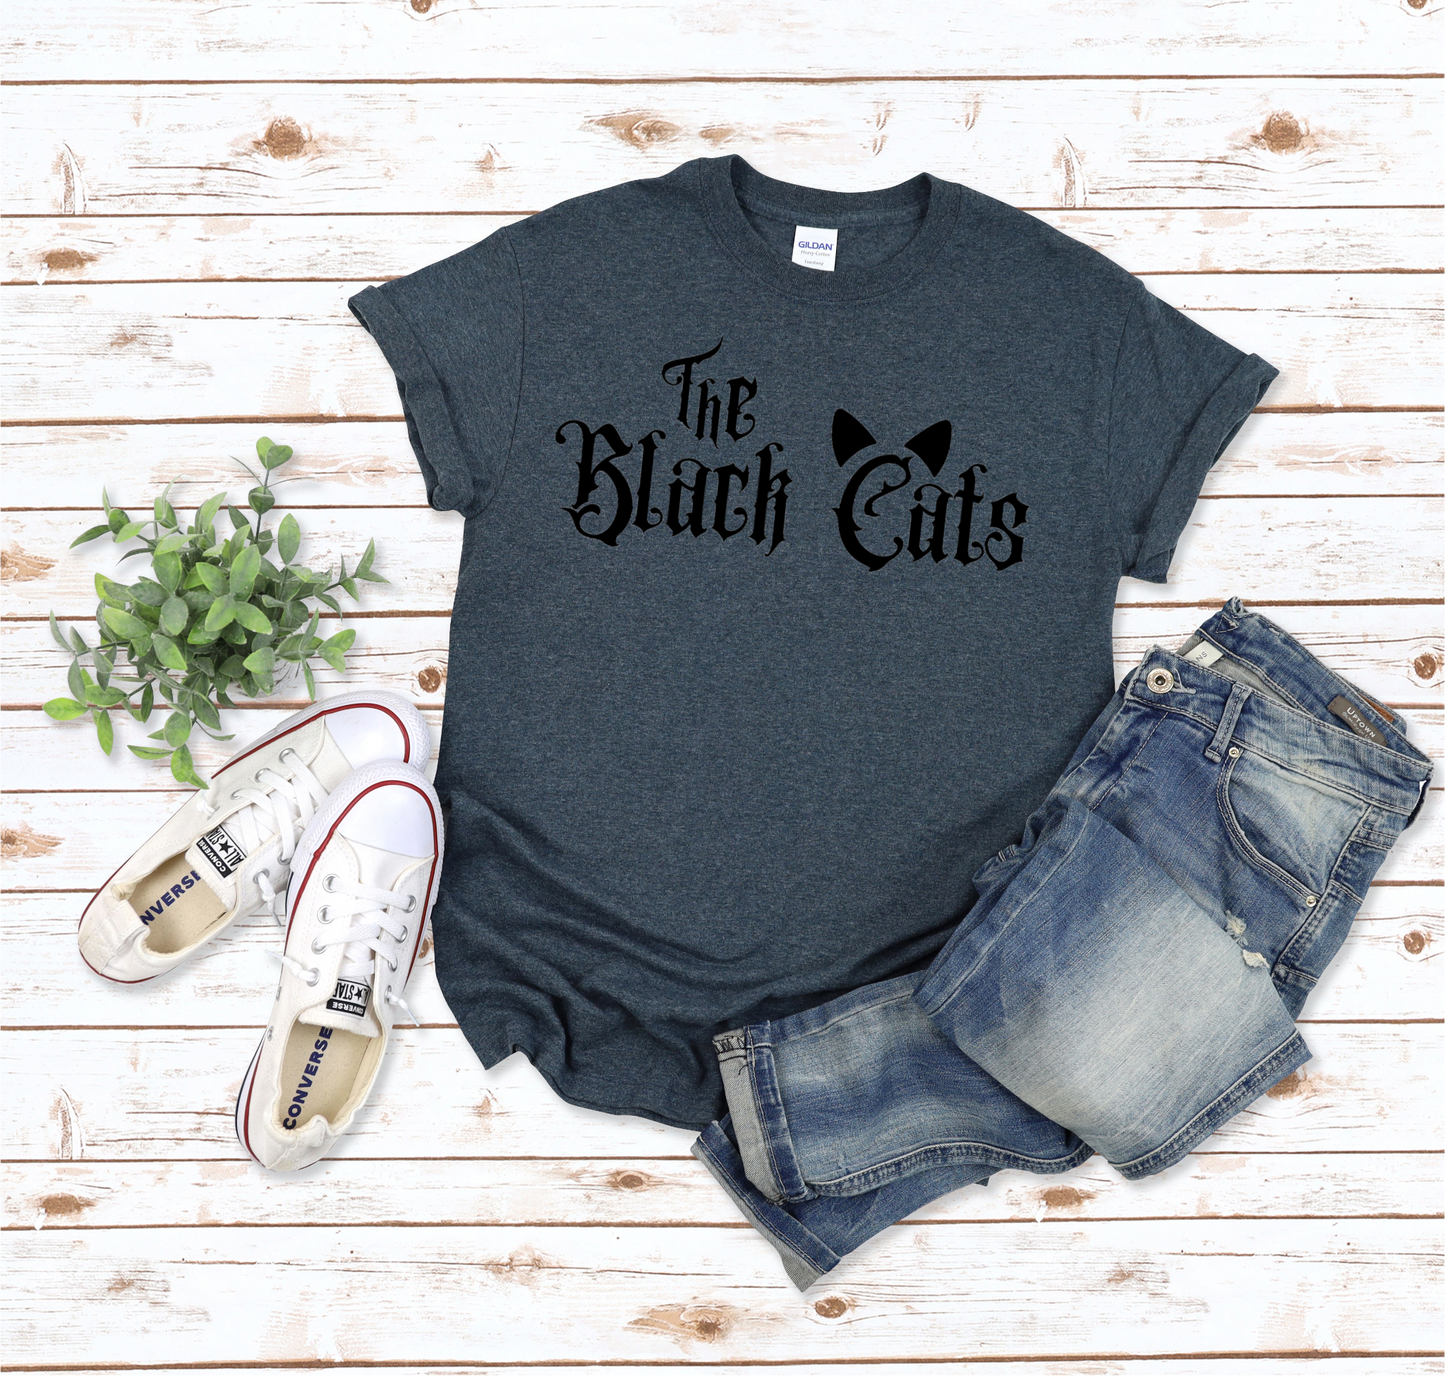 The Black Cats T Shirt Gothic Tee Graphic Nevermore Clothing Nightshade Apparel